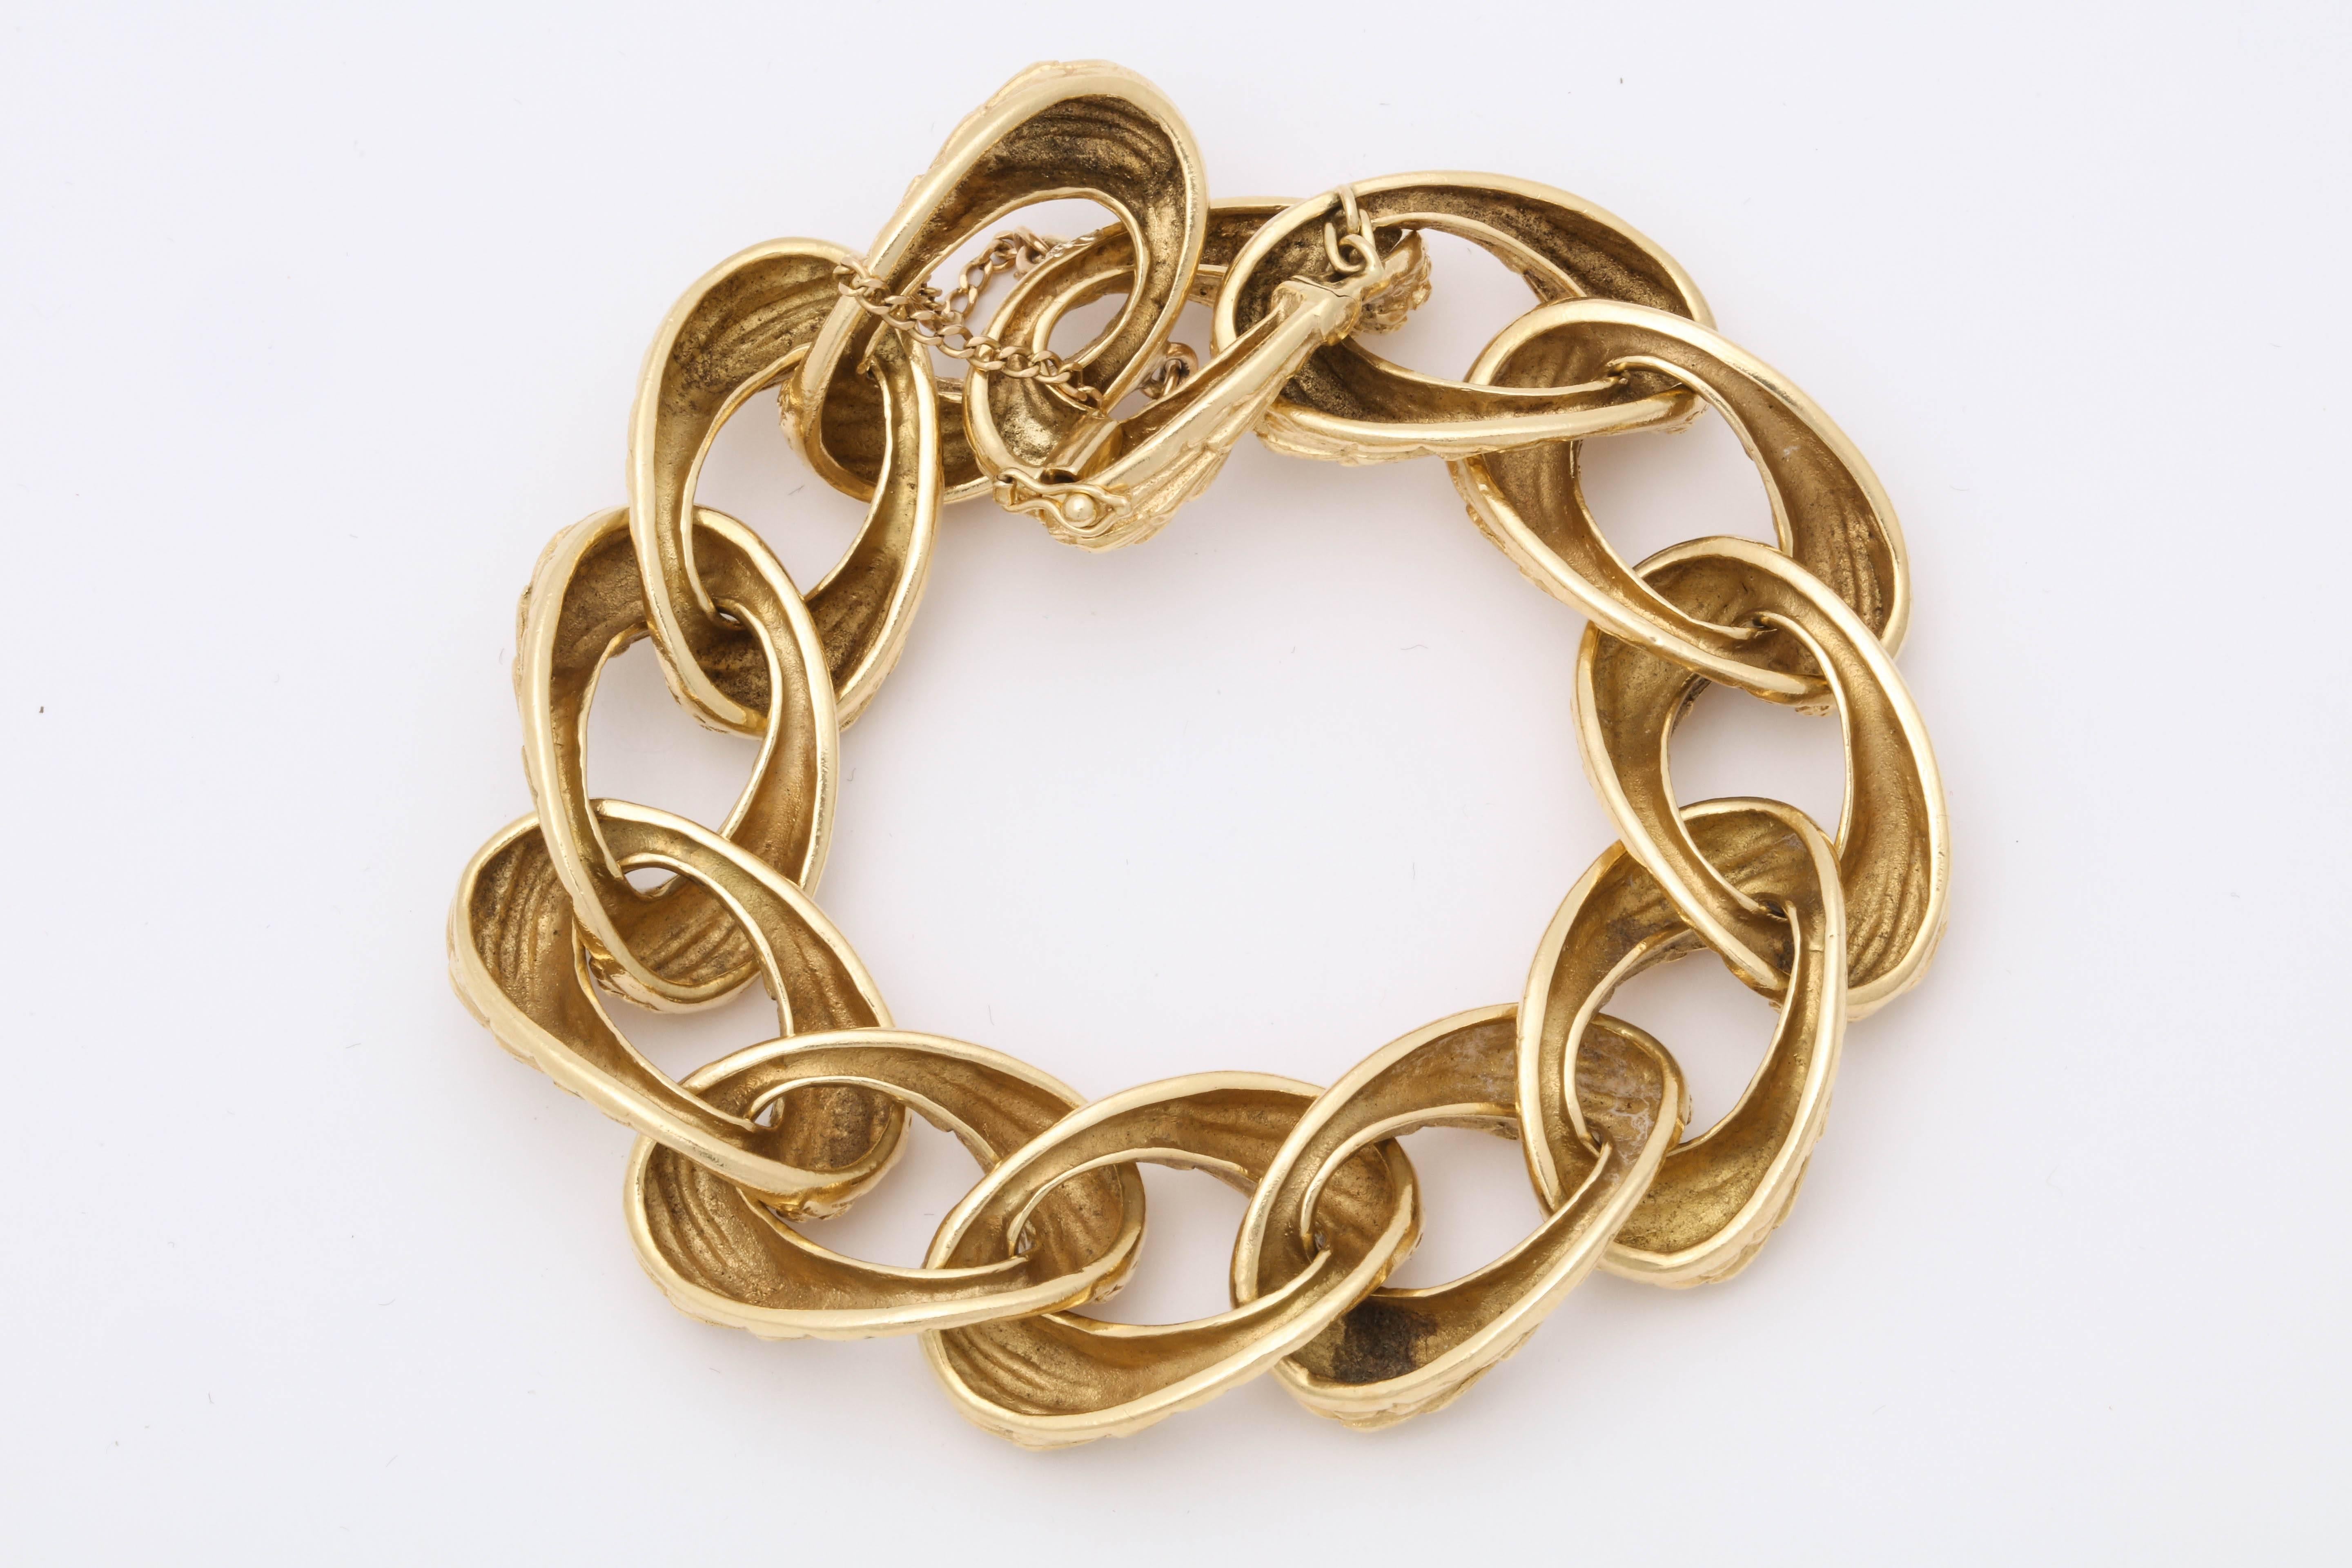 One Unisex Open Link Bracelet Crafted In 18kt Textured Gold Links. Created To Emulate A Bamboo Style Branch Like Texture This Bracelet Is A Very Beautifully Made Piece. Designed In The 1970's In America.NOTE: SAFETY CHAIN For Extra Security Made In